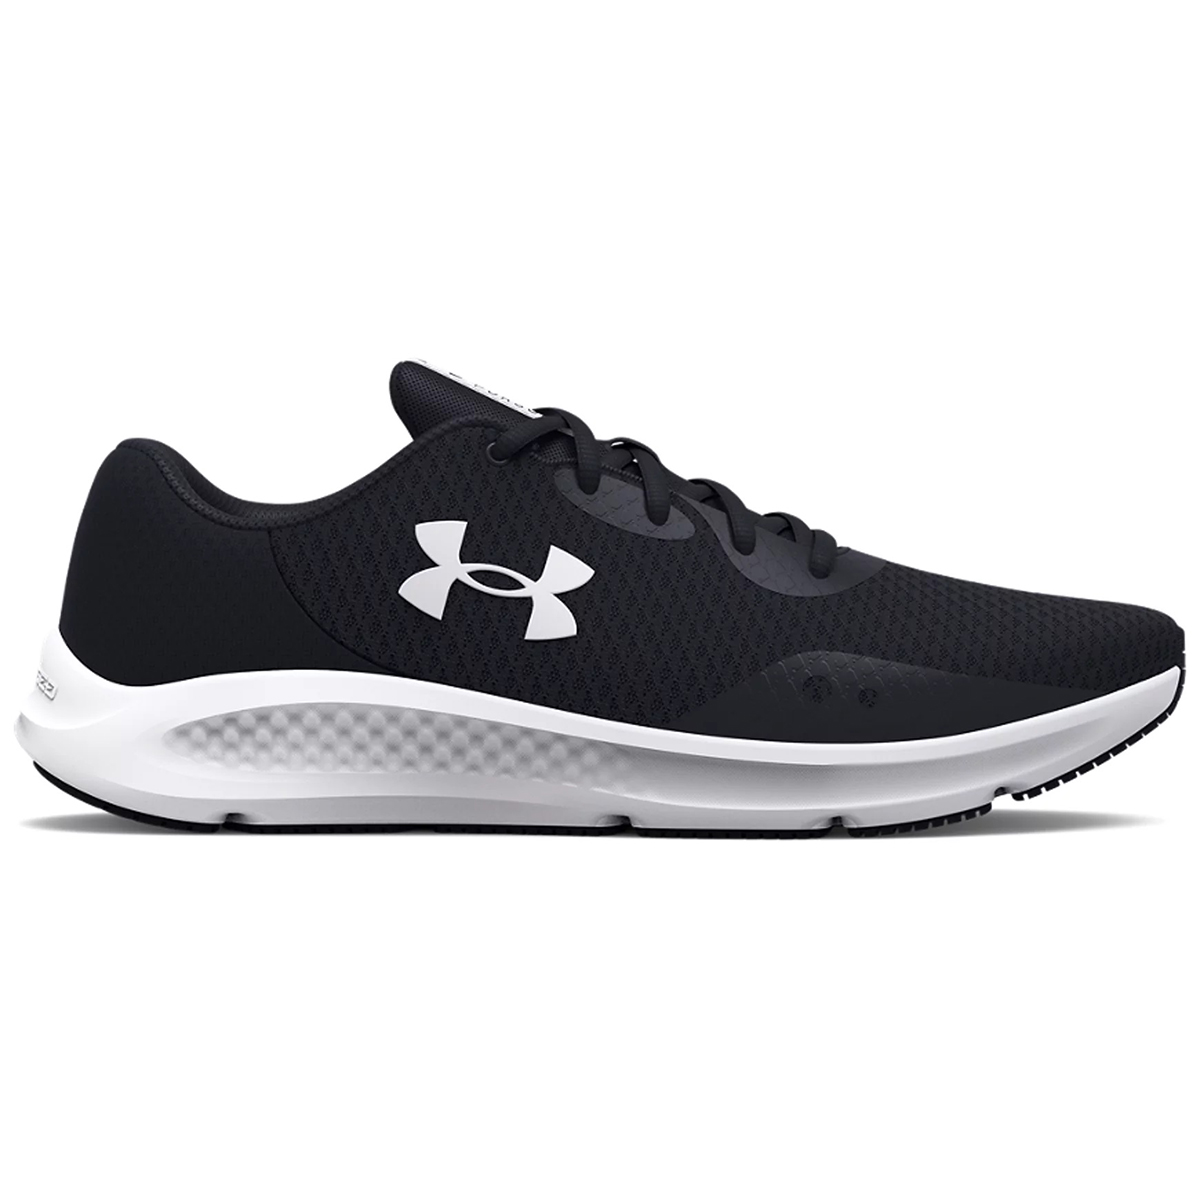 Under Armour Women's Ua Charged Pursuit 3 Running Shoes